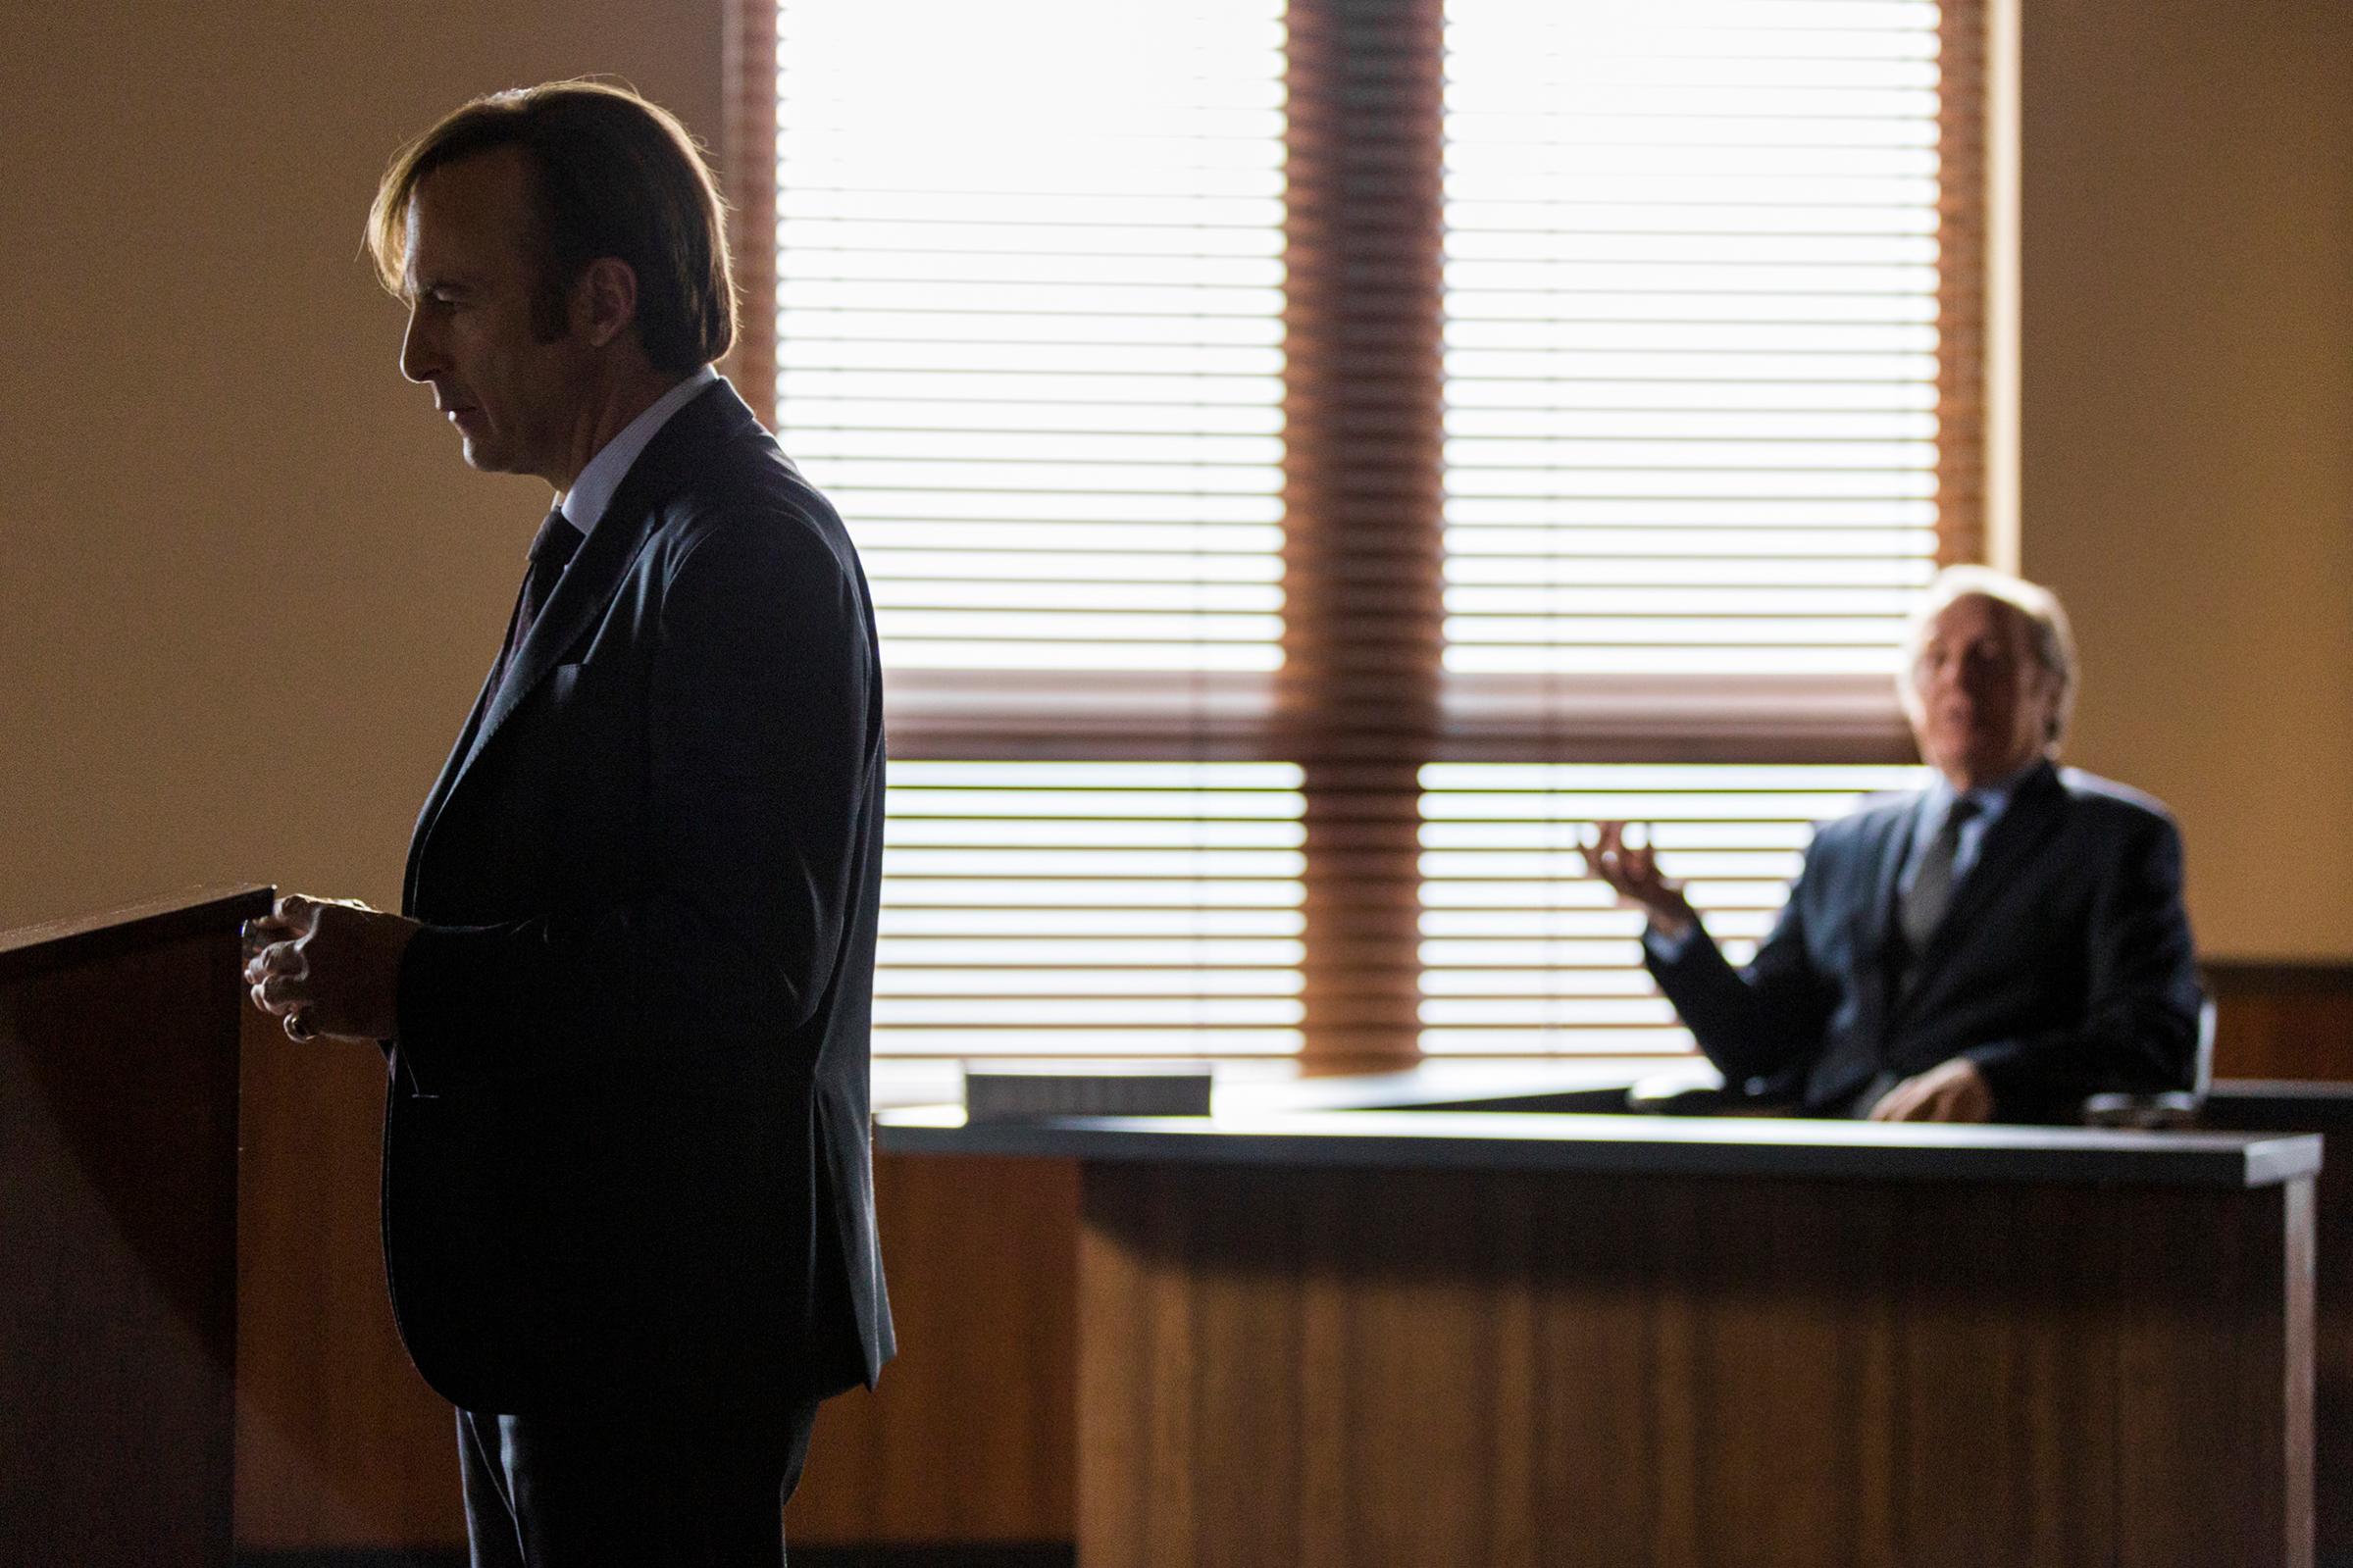 Michael McKean as Chuck McGill, Bob Odenkirk as Jimmy McGill - Better Call Saul _ Season 3, Episode 5 - Photo Credit: Michele K. Short/AMC/Sony Pictures Television